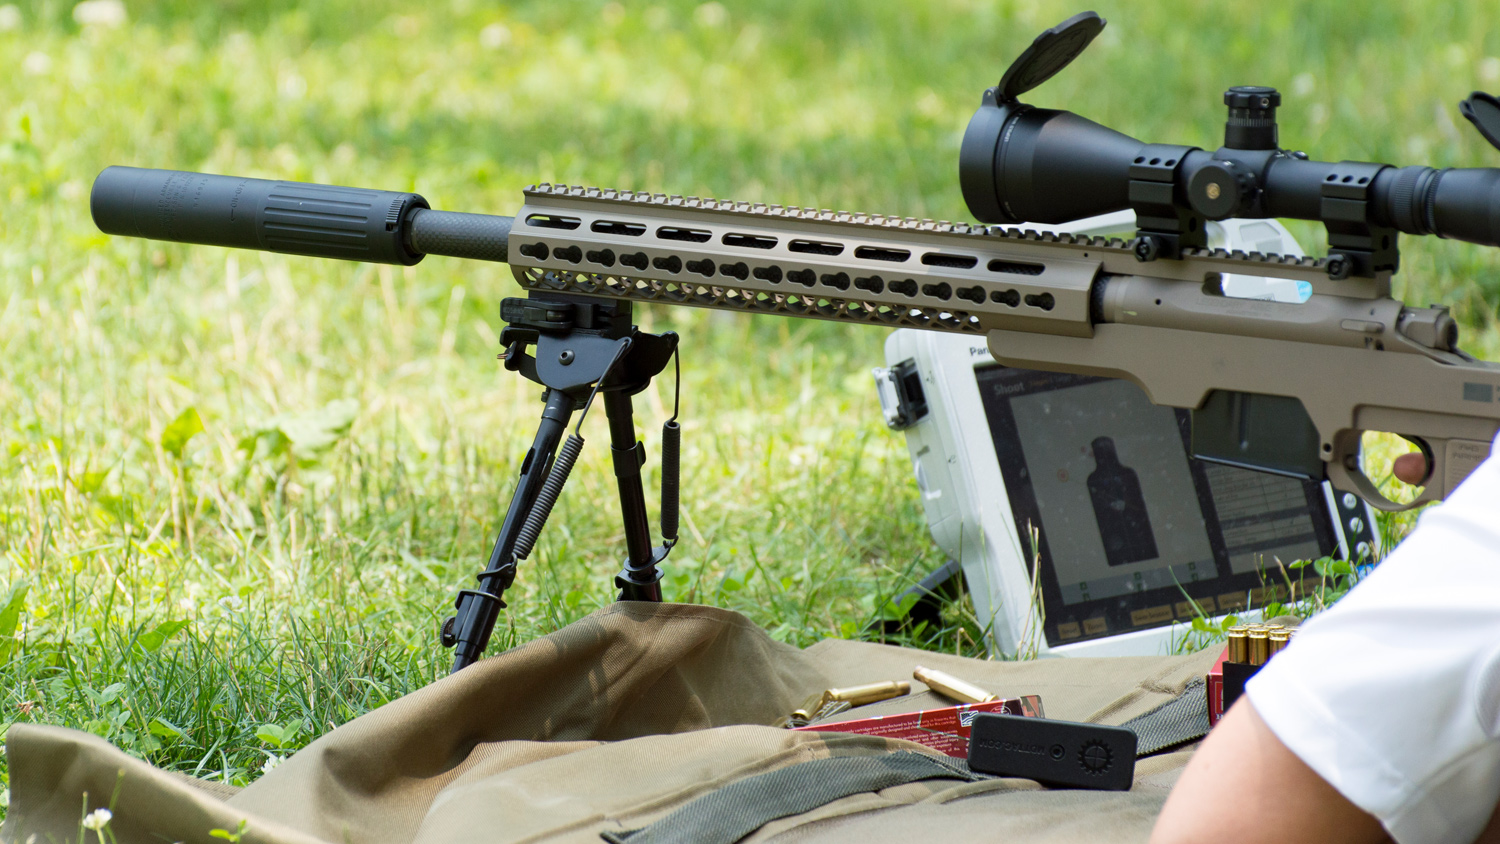 Rifle zeroing with an electronic target system